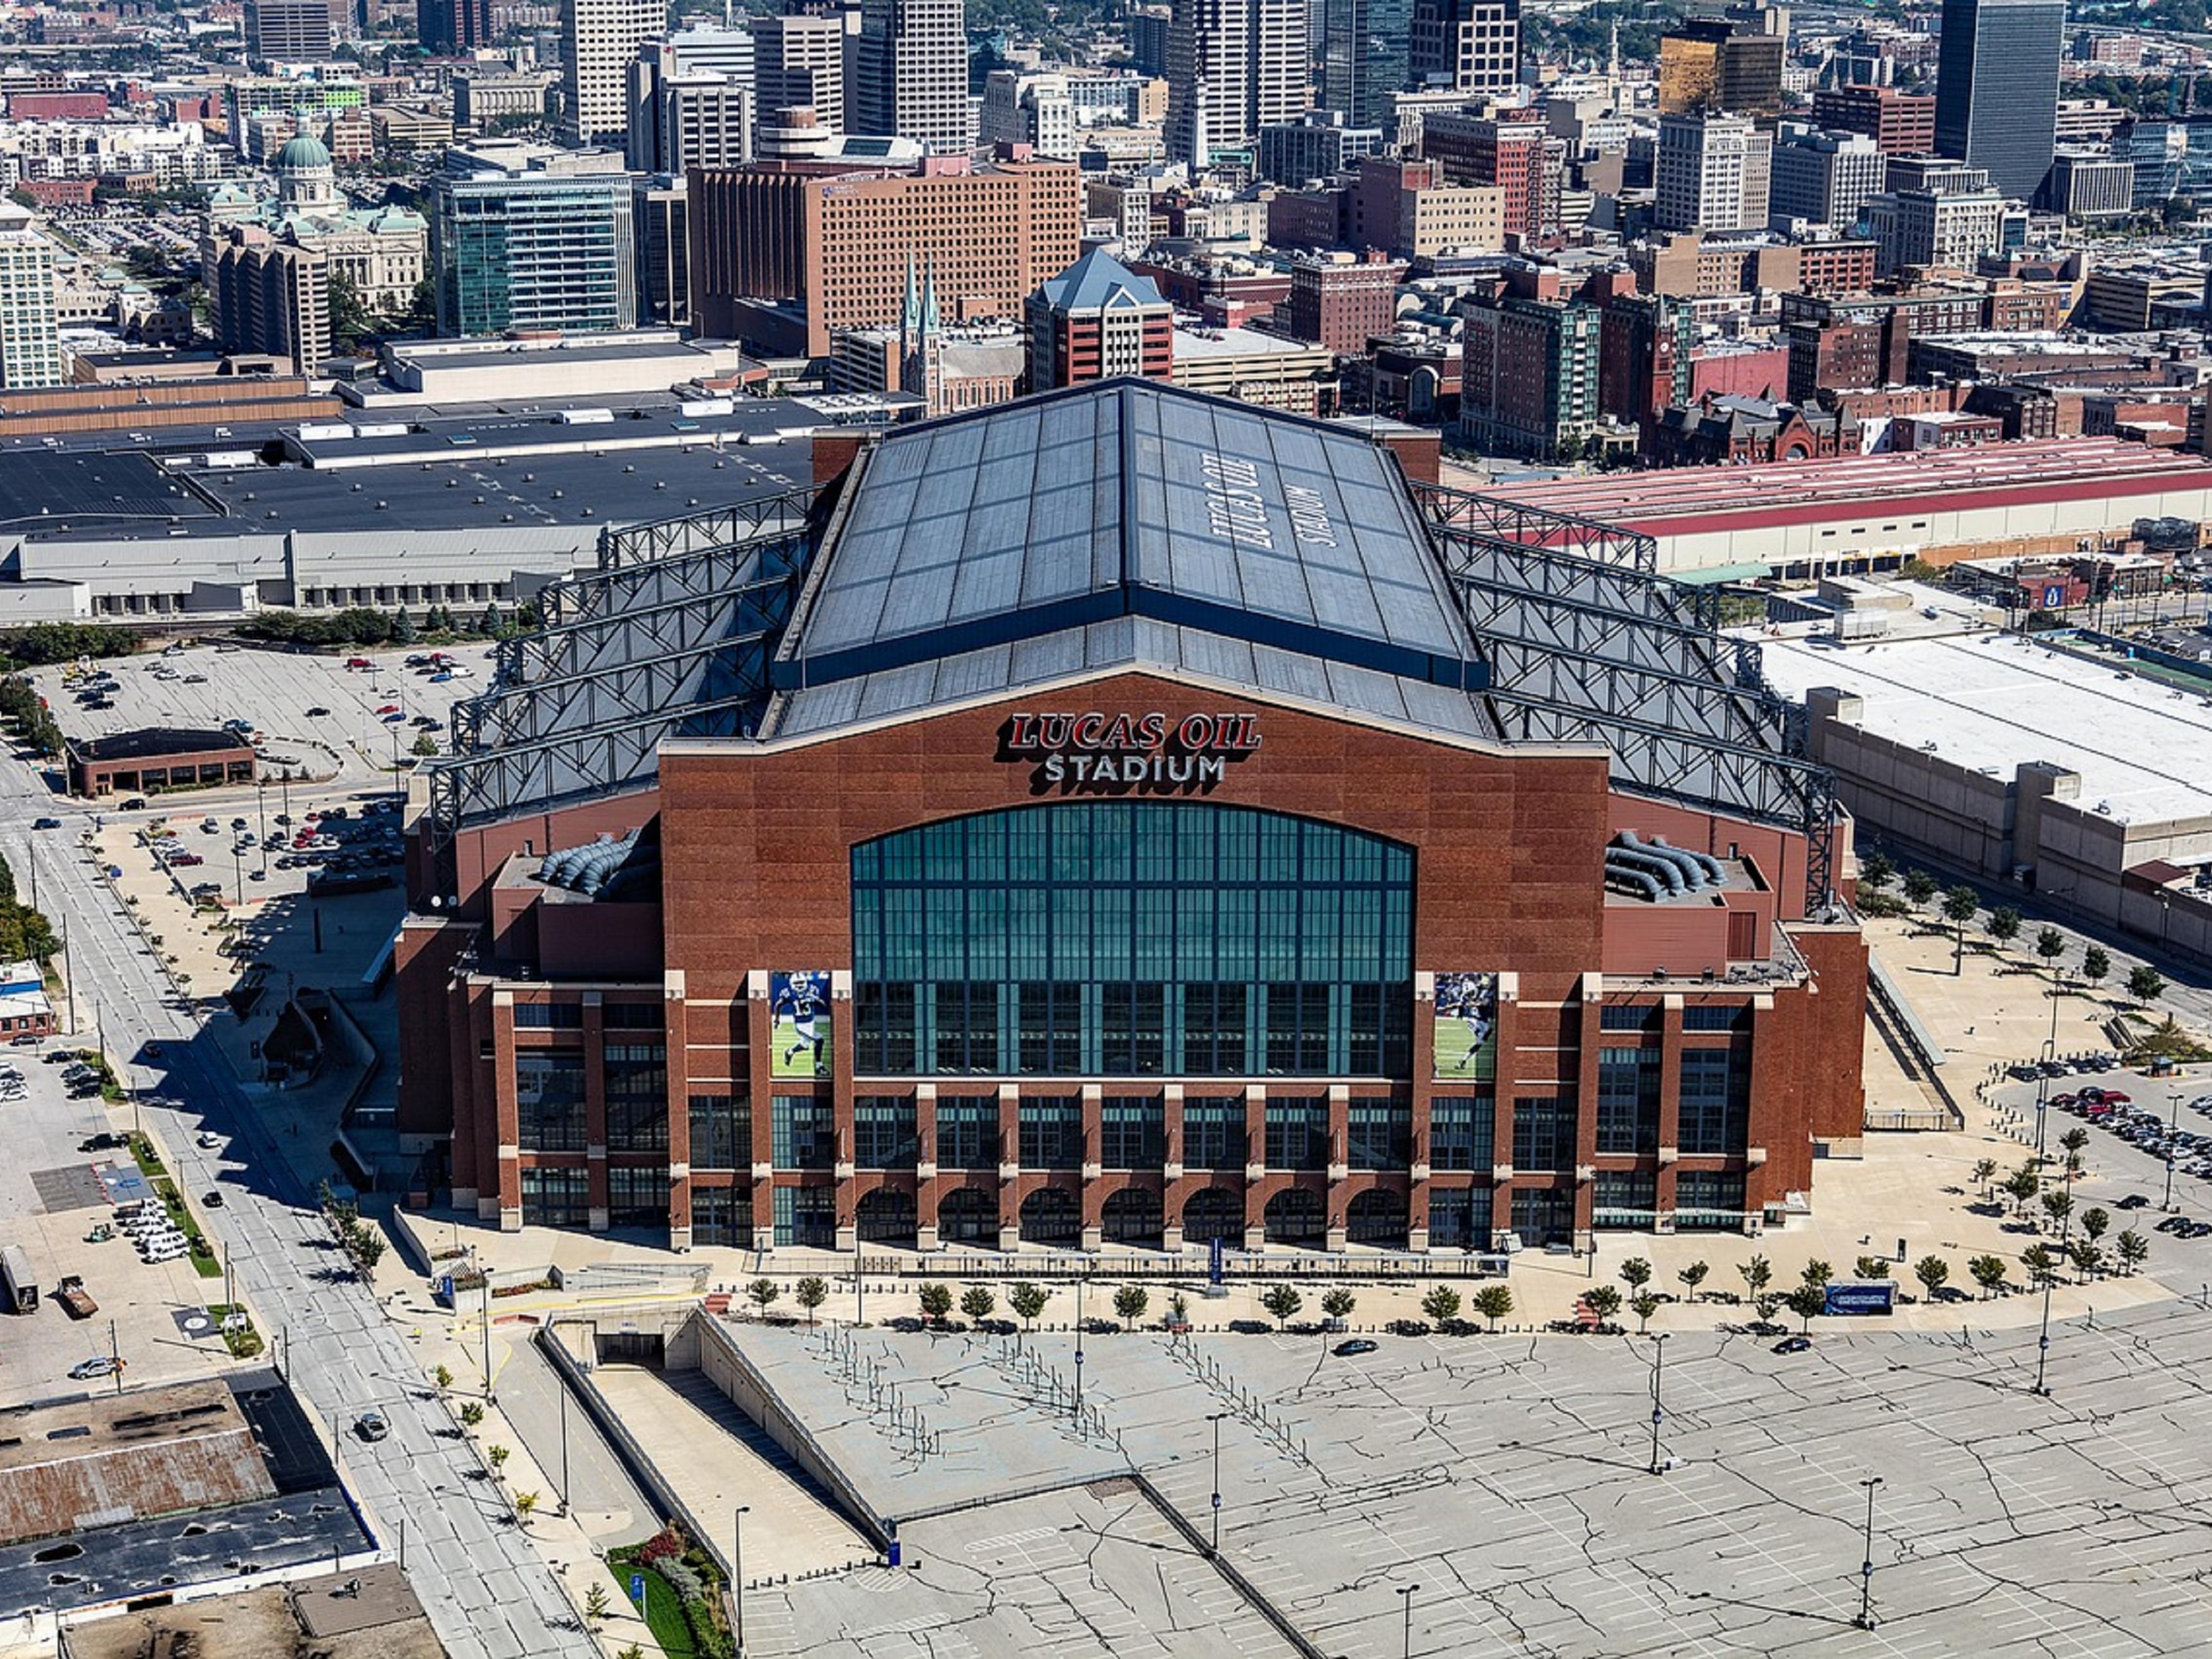 We welcome travelers to Indianapolis and sports enthusiast who will appreciate the short distance to Lucas Oil Stadium. Lucas Oil Stadium is home to the Indianapolis Colts and an incredible array of national and international events.